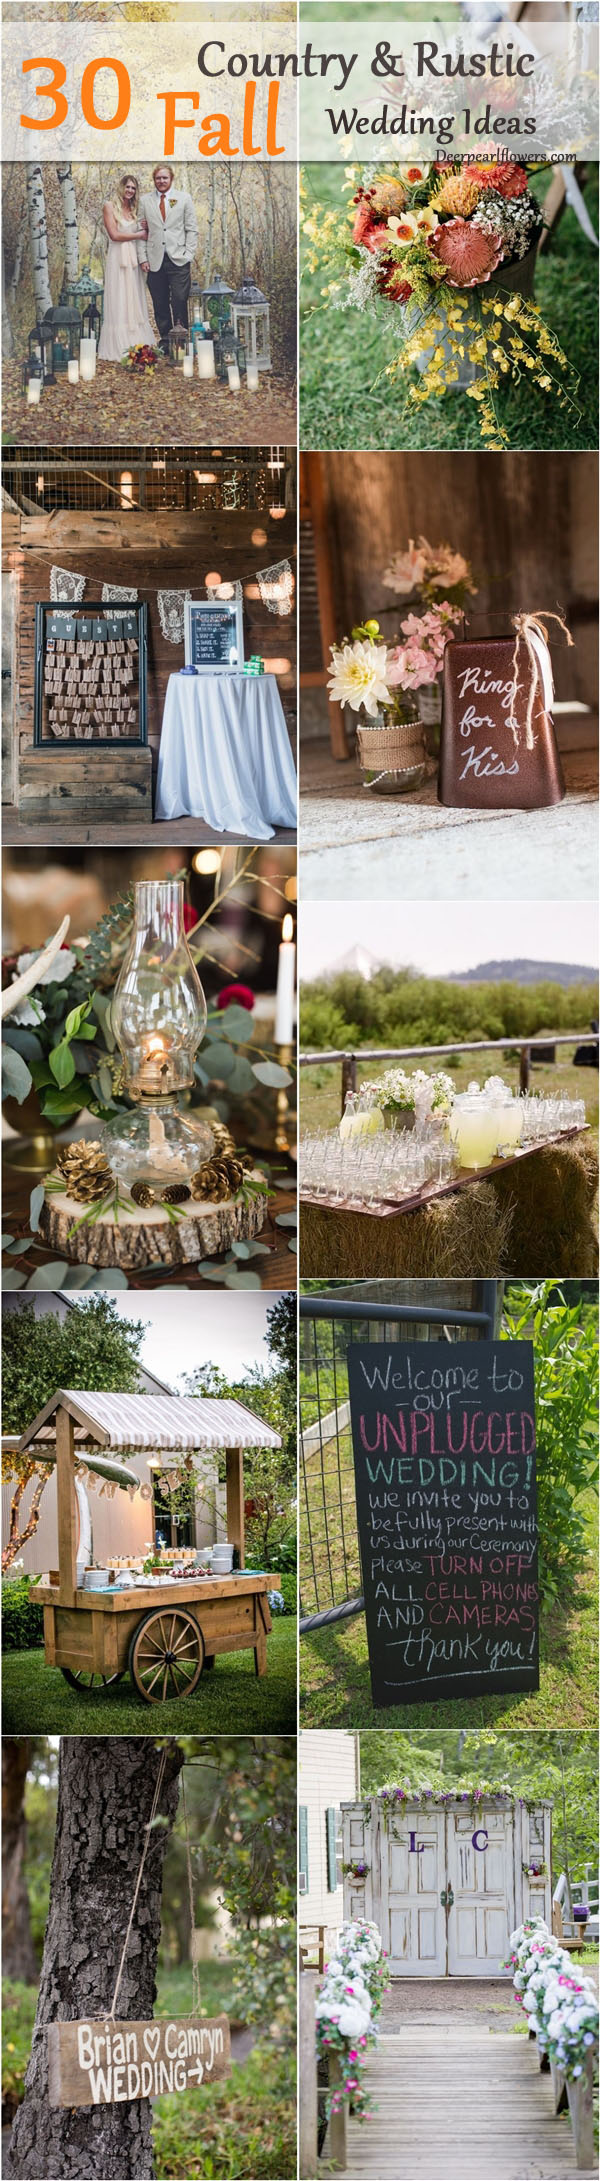 Rustic country outdoor fall wedding ideas